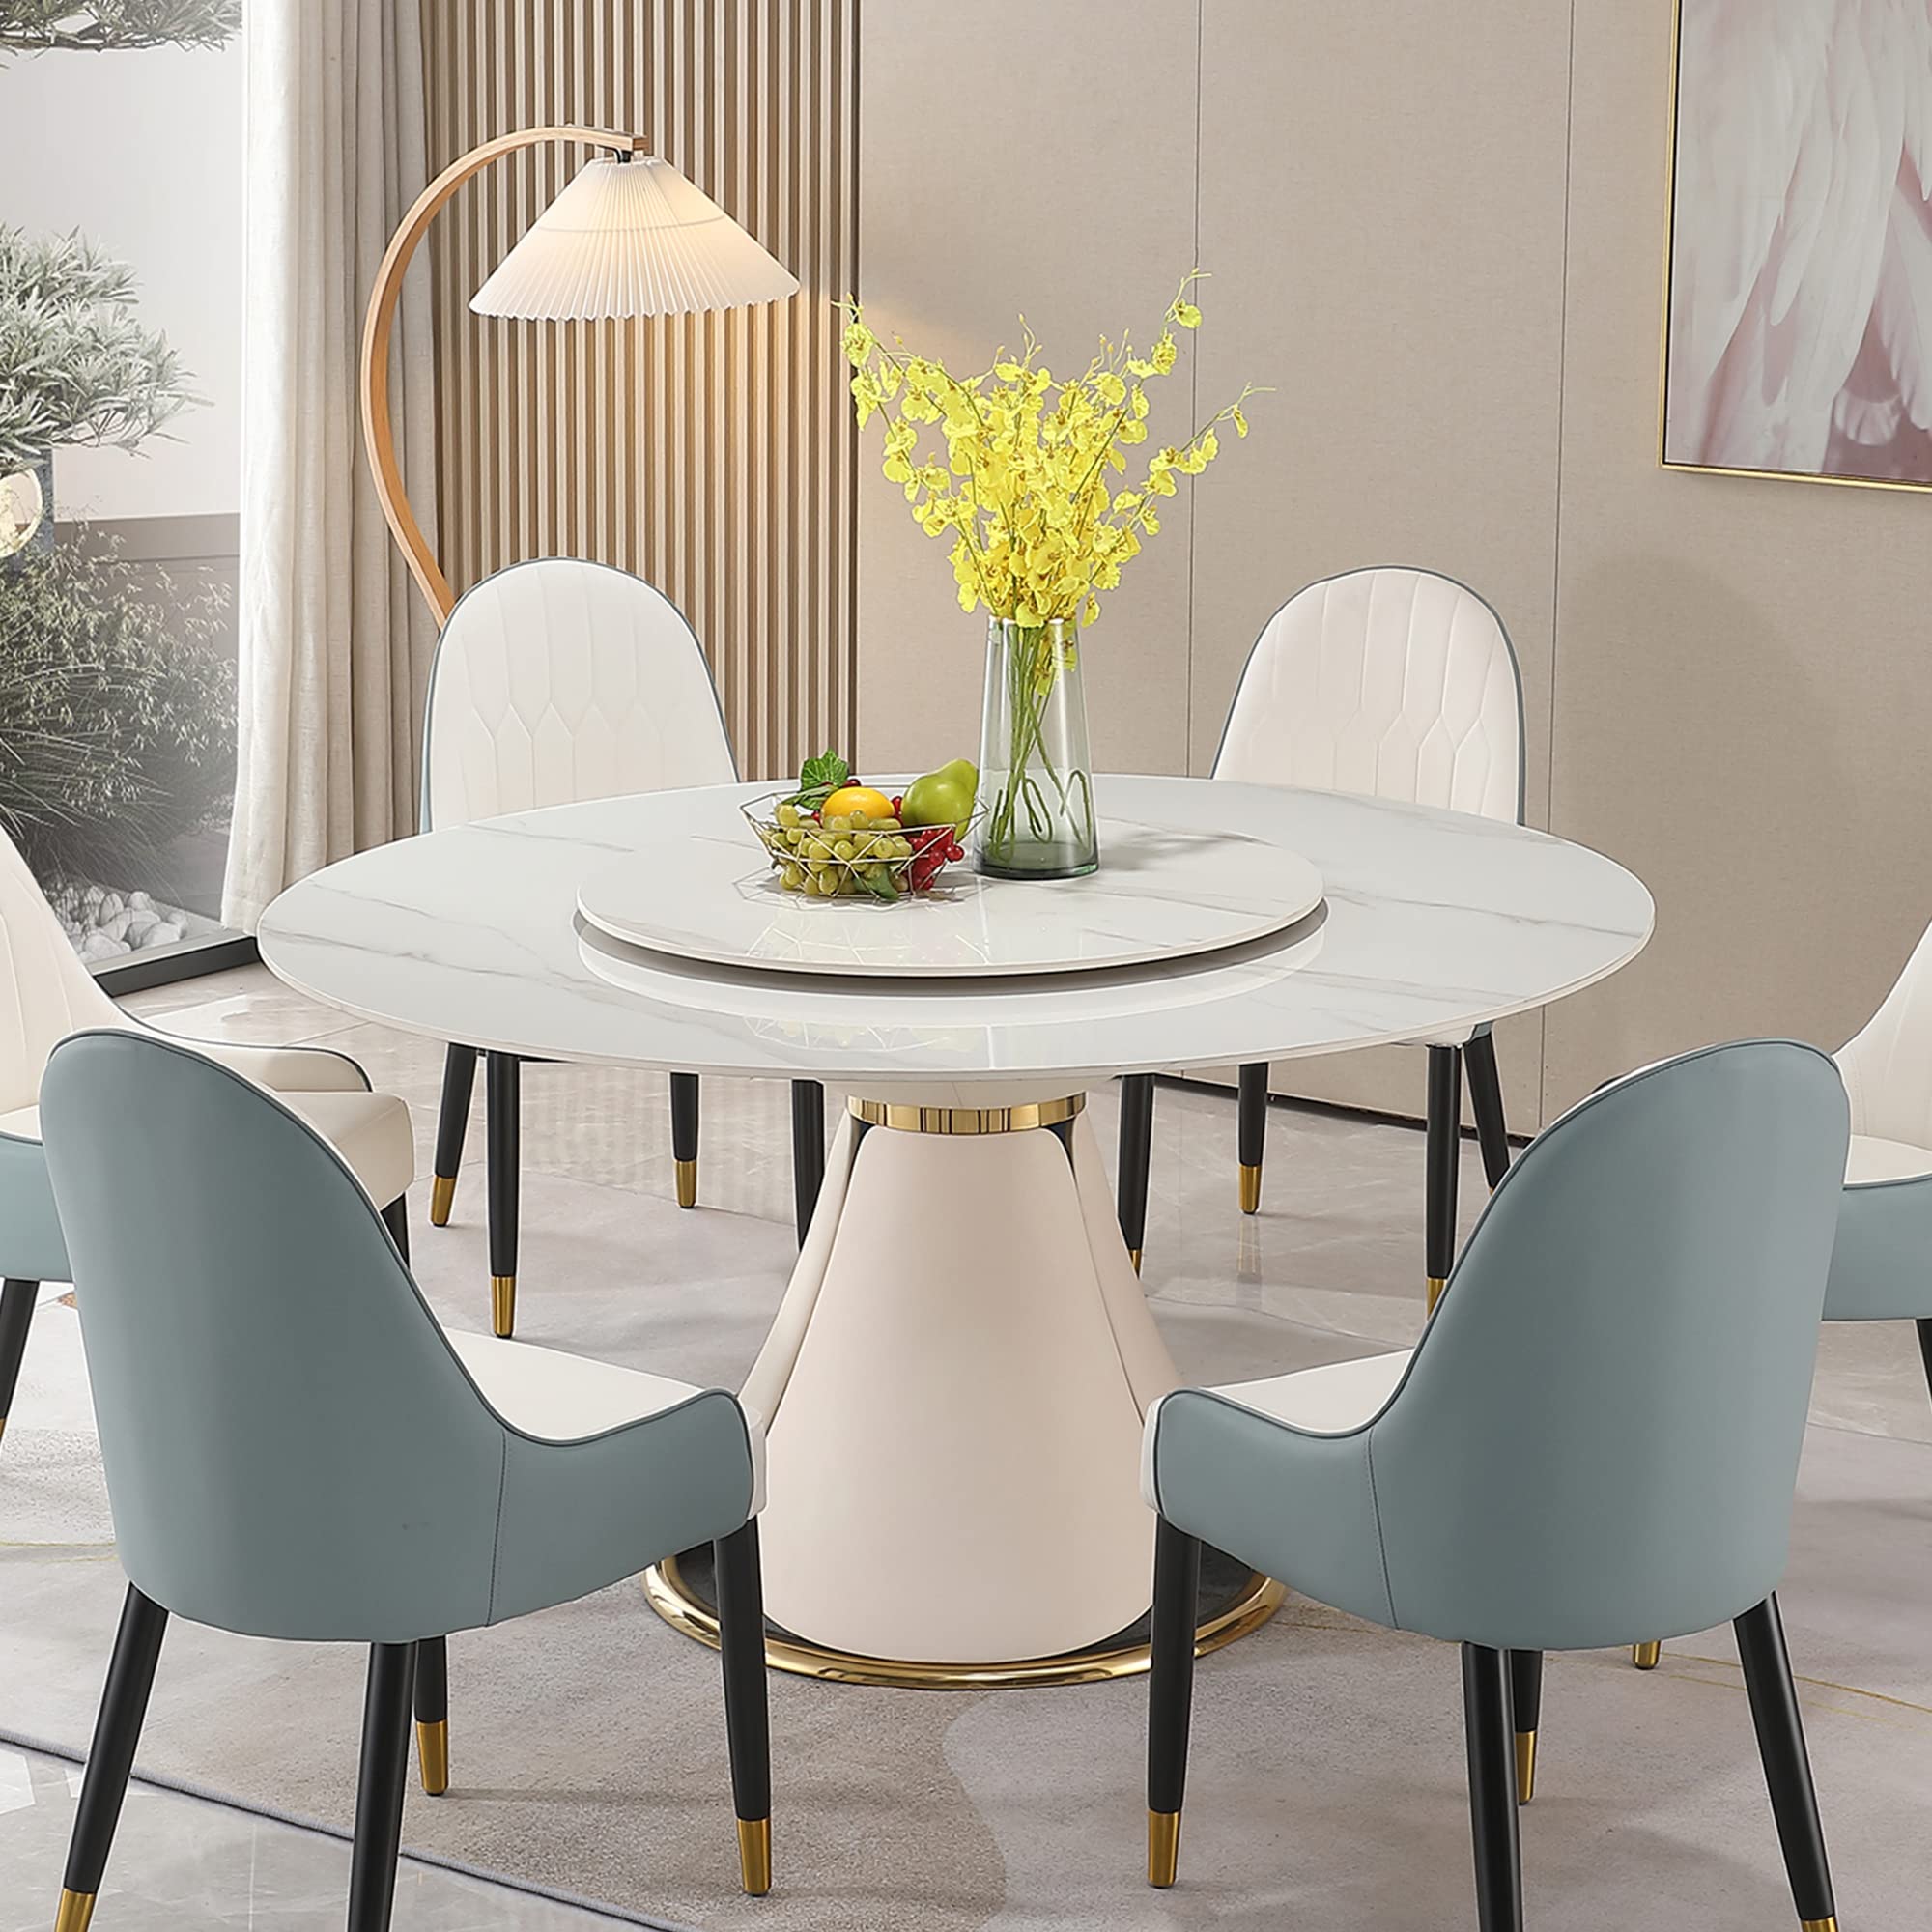 Runboll 59" Sintered Stone Round Dining Table with Detachable Lazy Susan Modern Dinner Table with 31.5" Round Turntable, PU Leather and Metal Pedestal(Not Included Chairs)